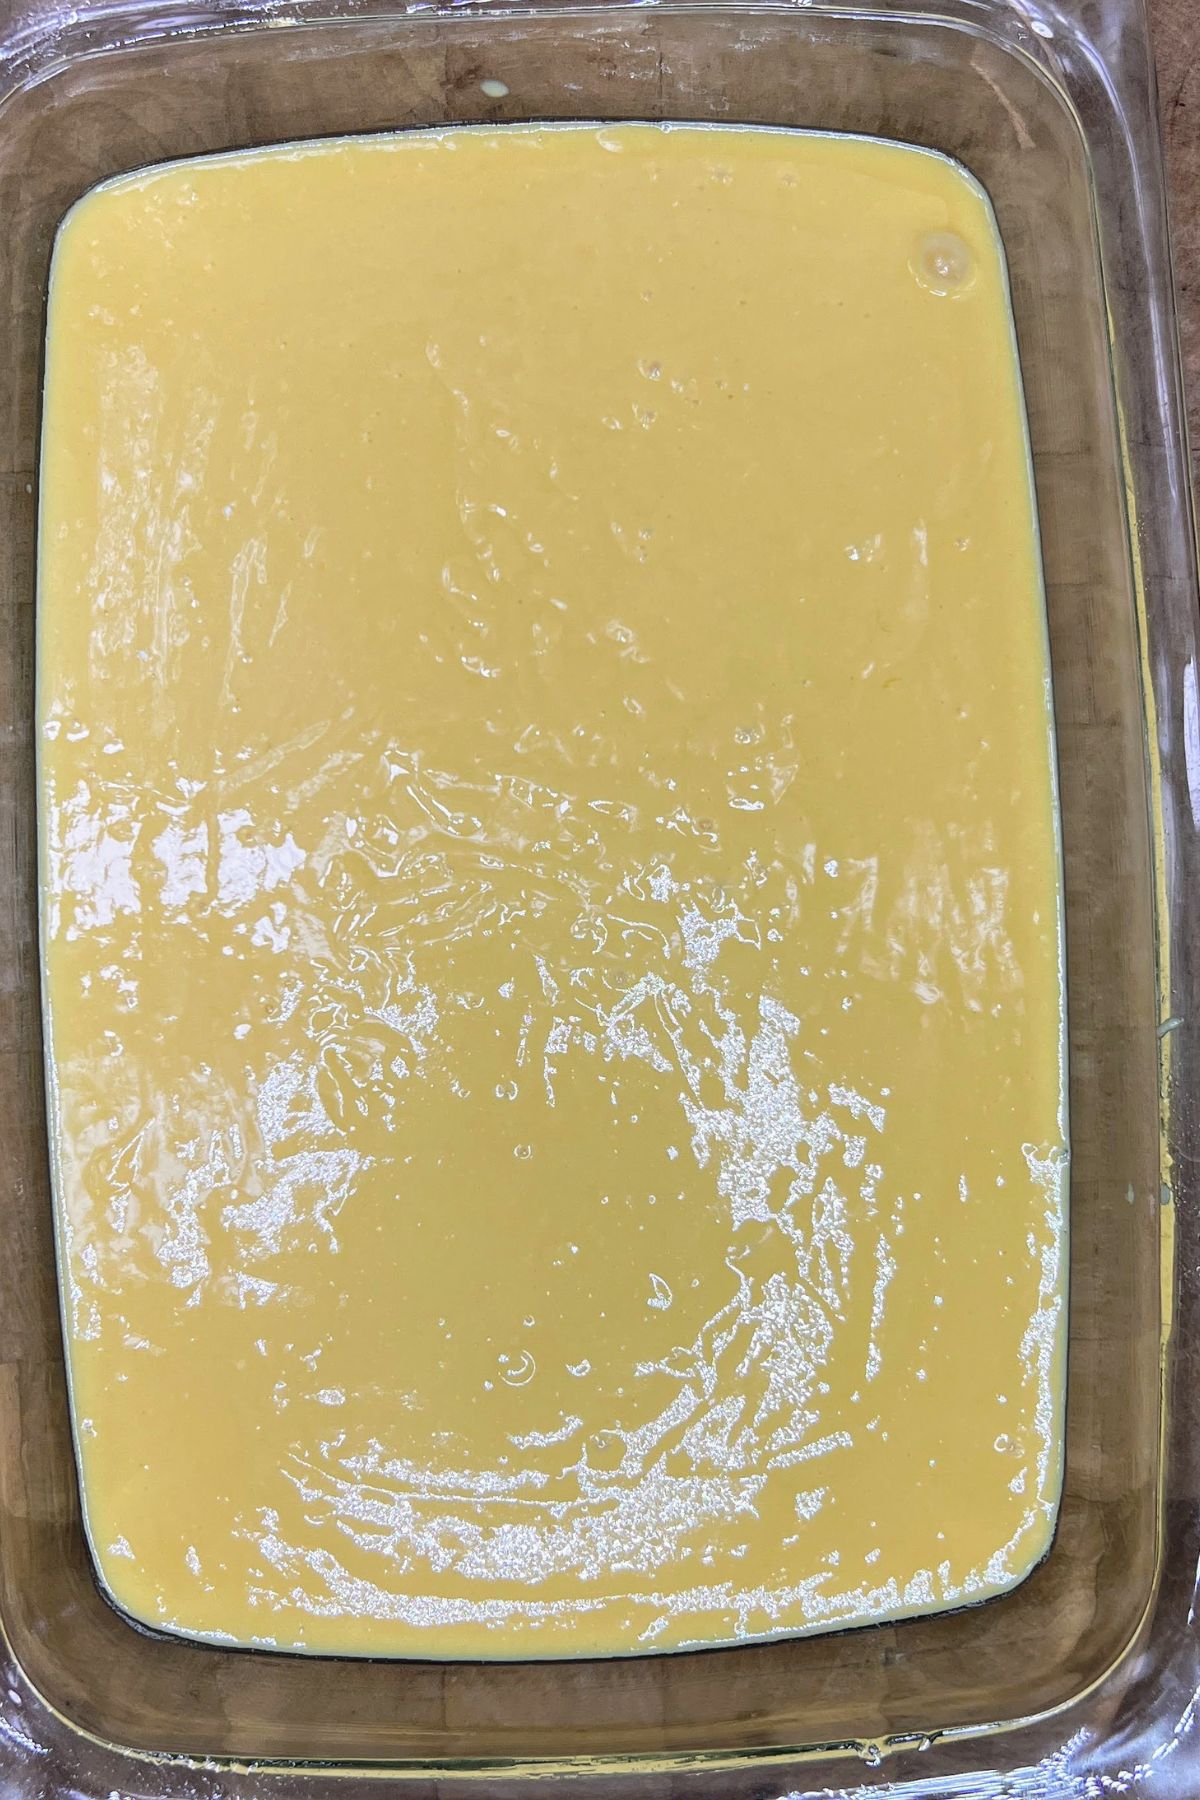 Yellow cake batter in a pan.